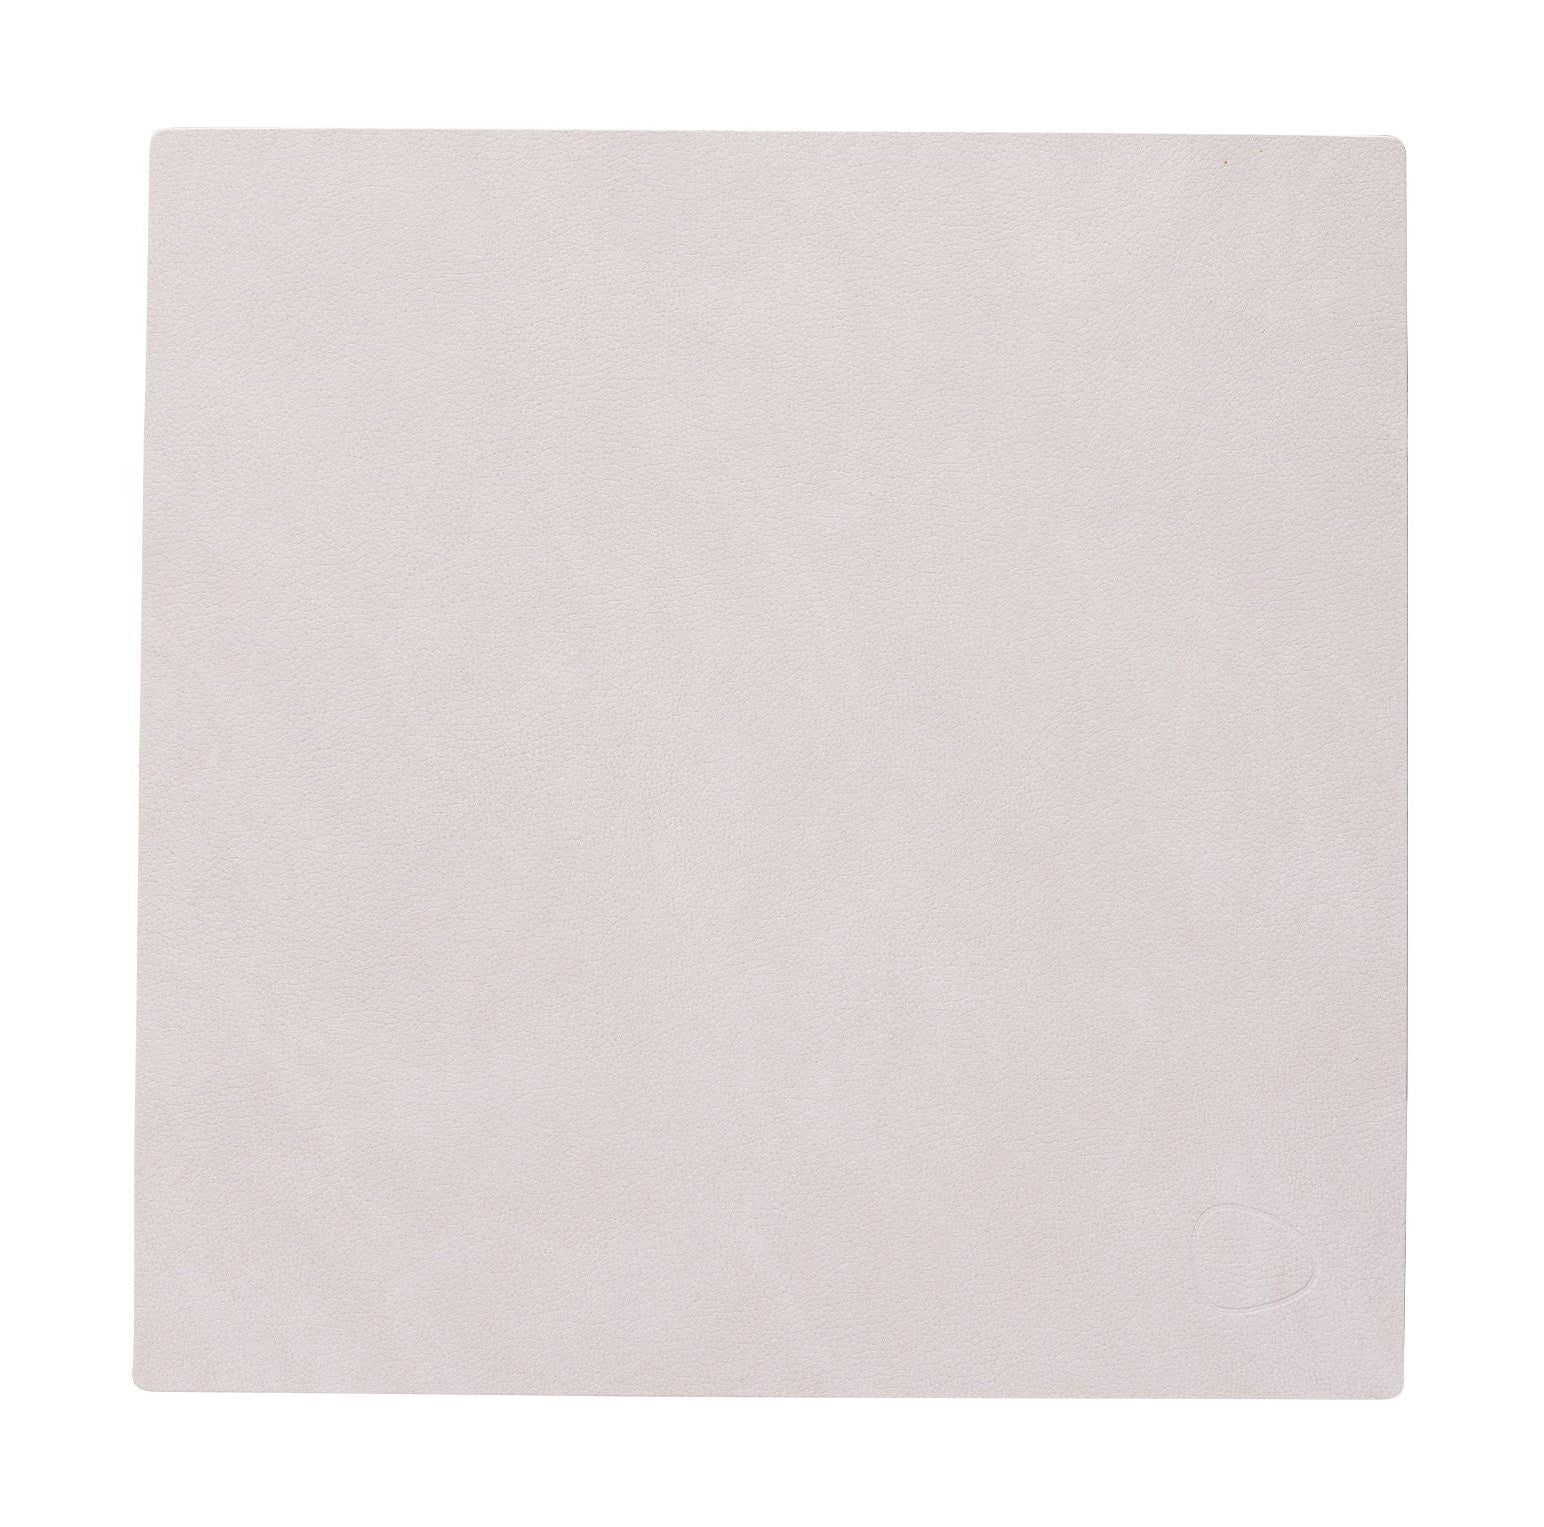 Lind ADN Table Mat Square S, Oyster White